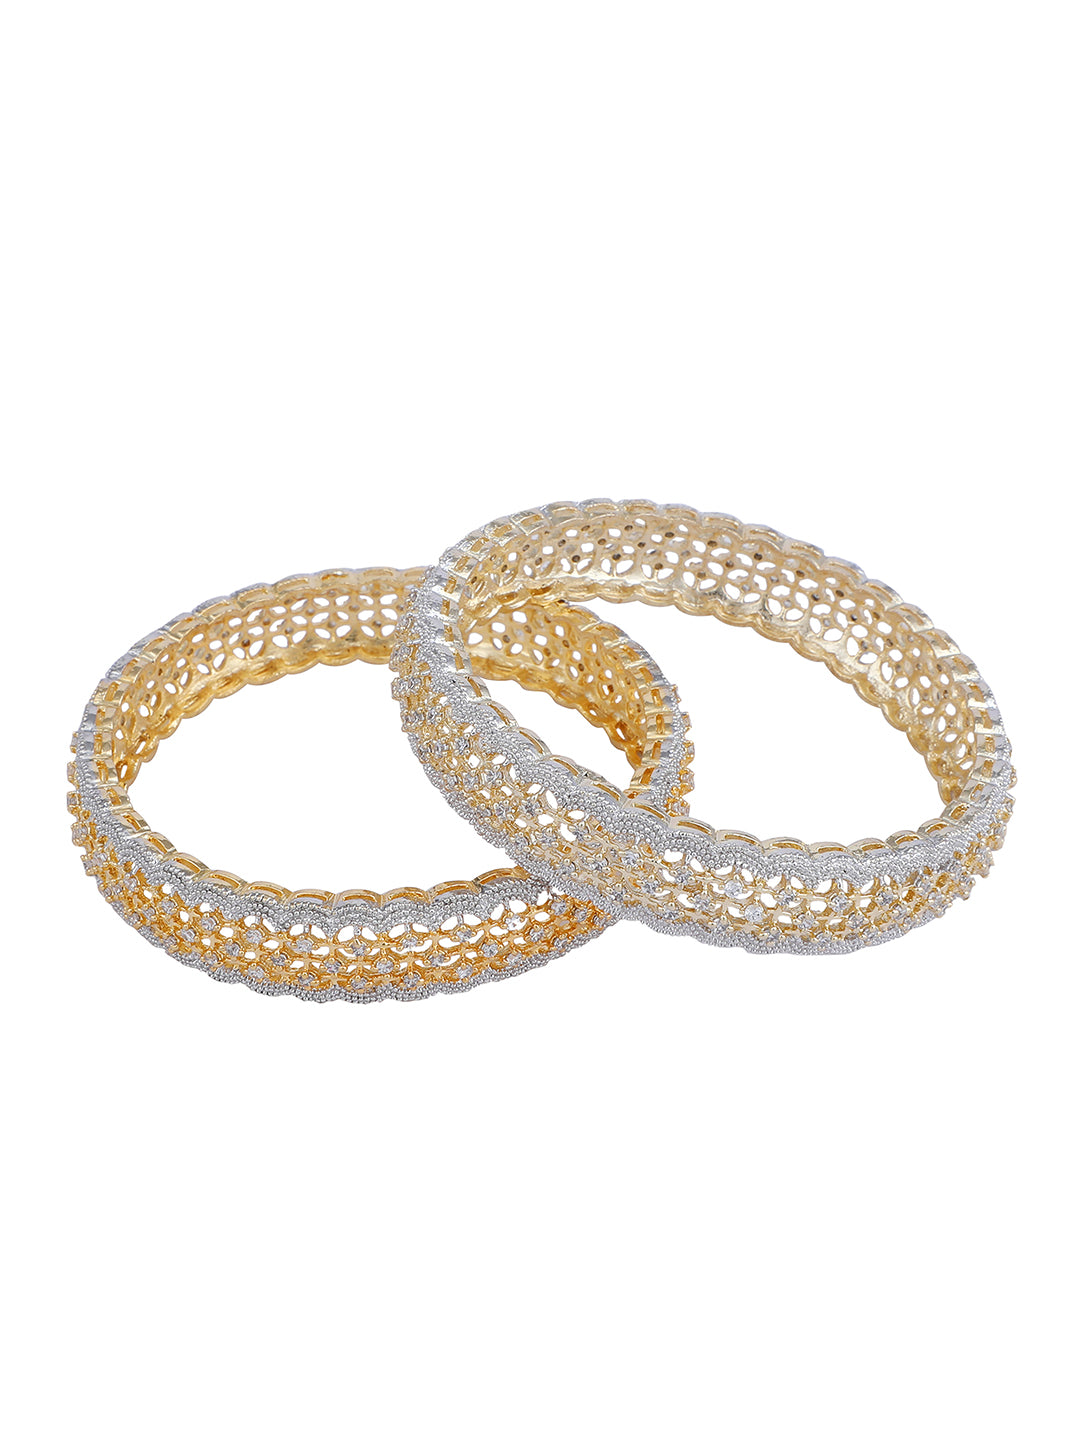 Women's Set Of 2 Gold-Plated White AD-Studded Bangles - Anikas Creation